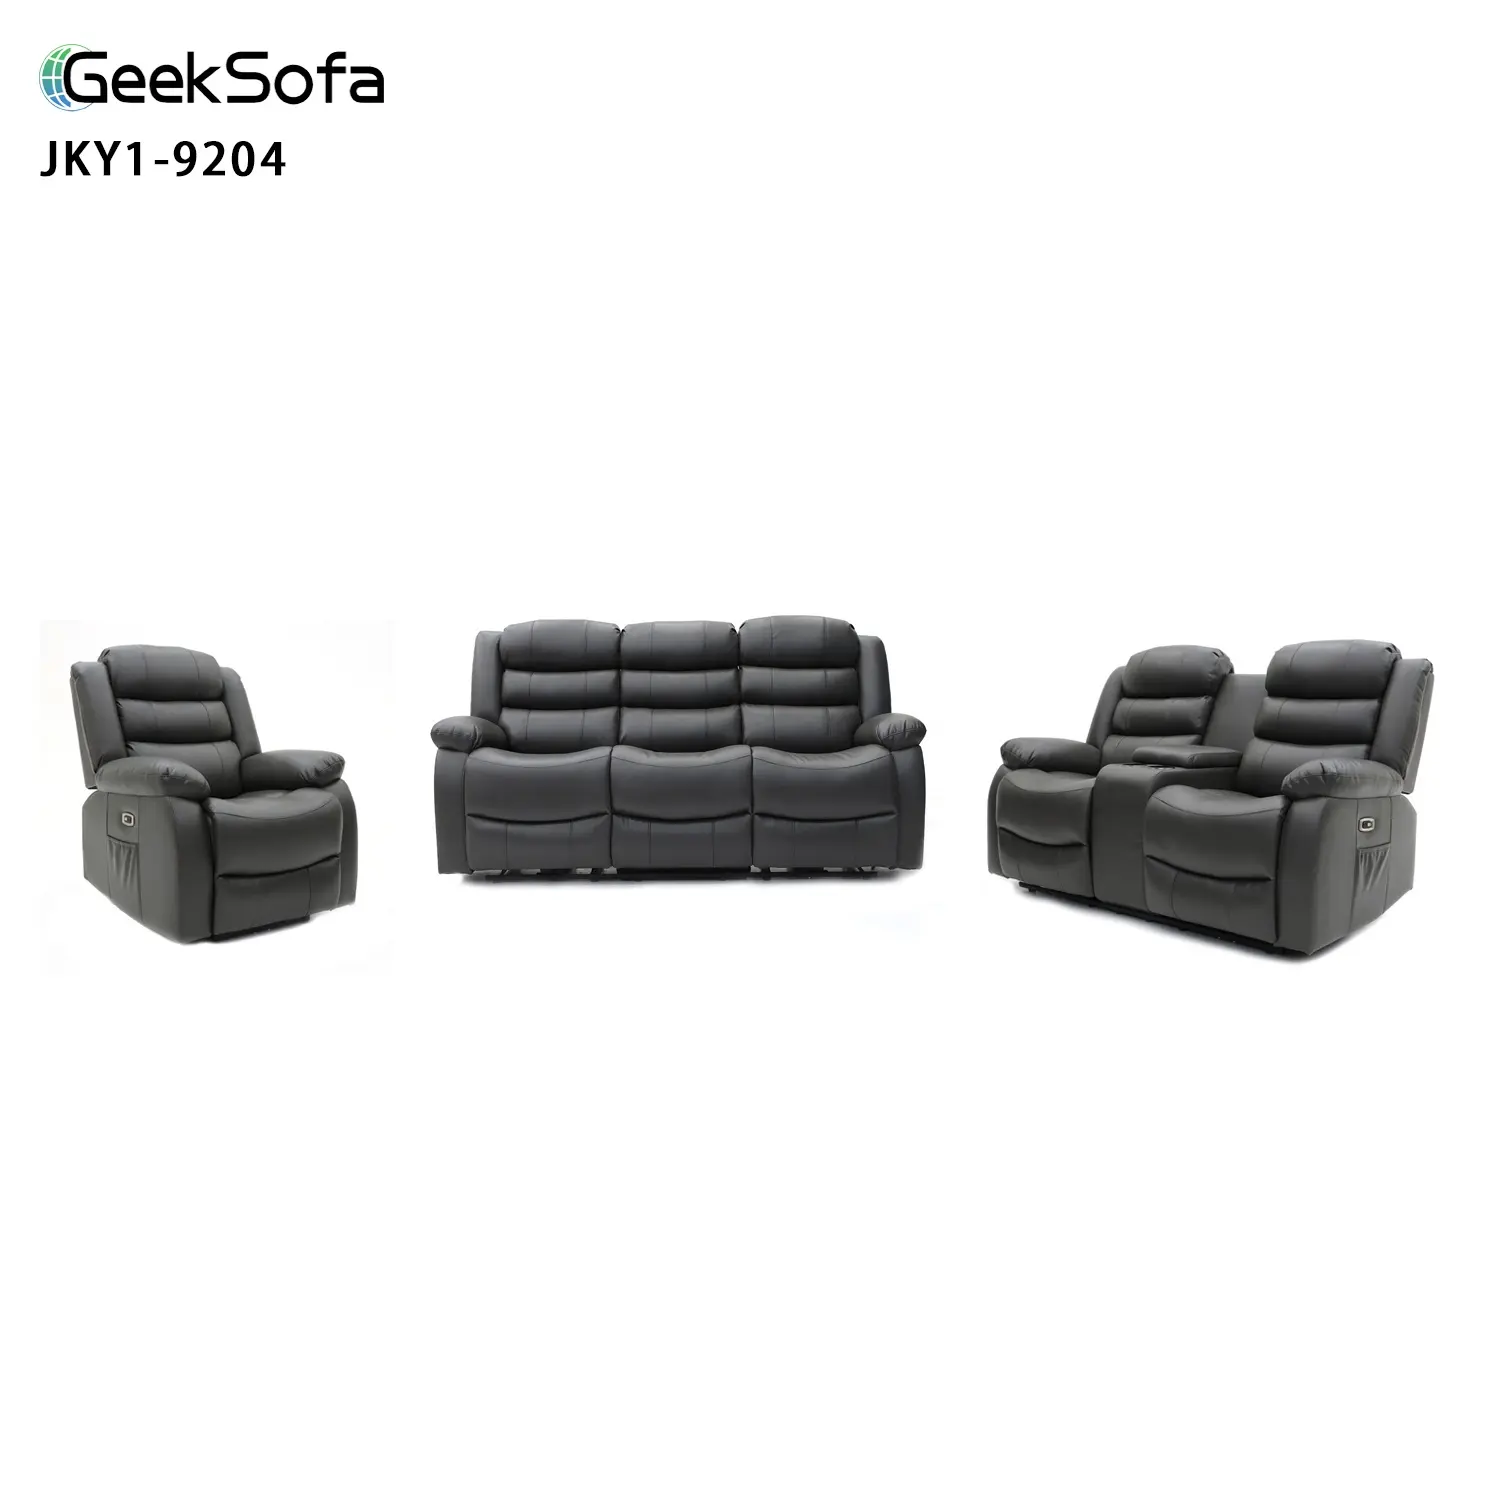 Geeksofa 3+2+1 Modern Air Leather Power Electric Motion Recliner Sofa Set with Console and Massage for Living Room Furniture